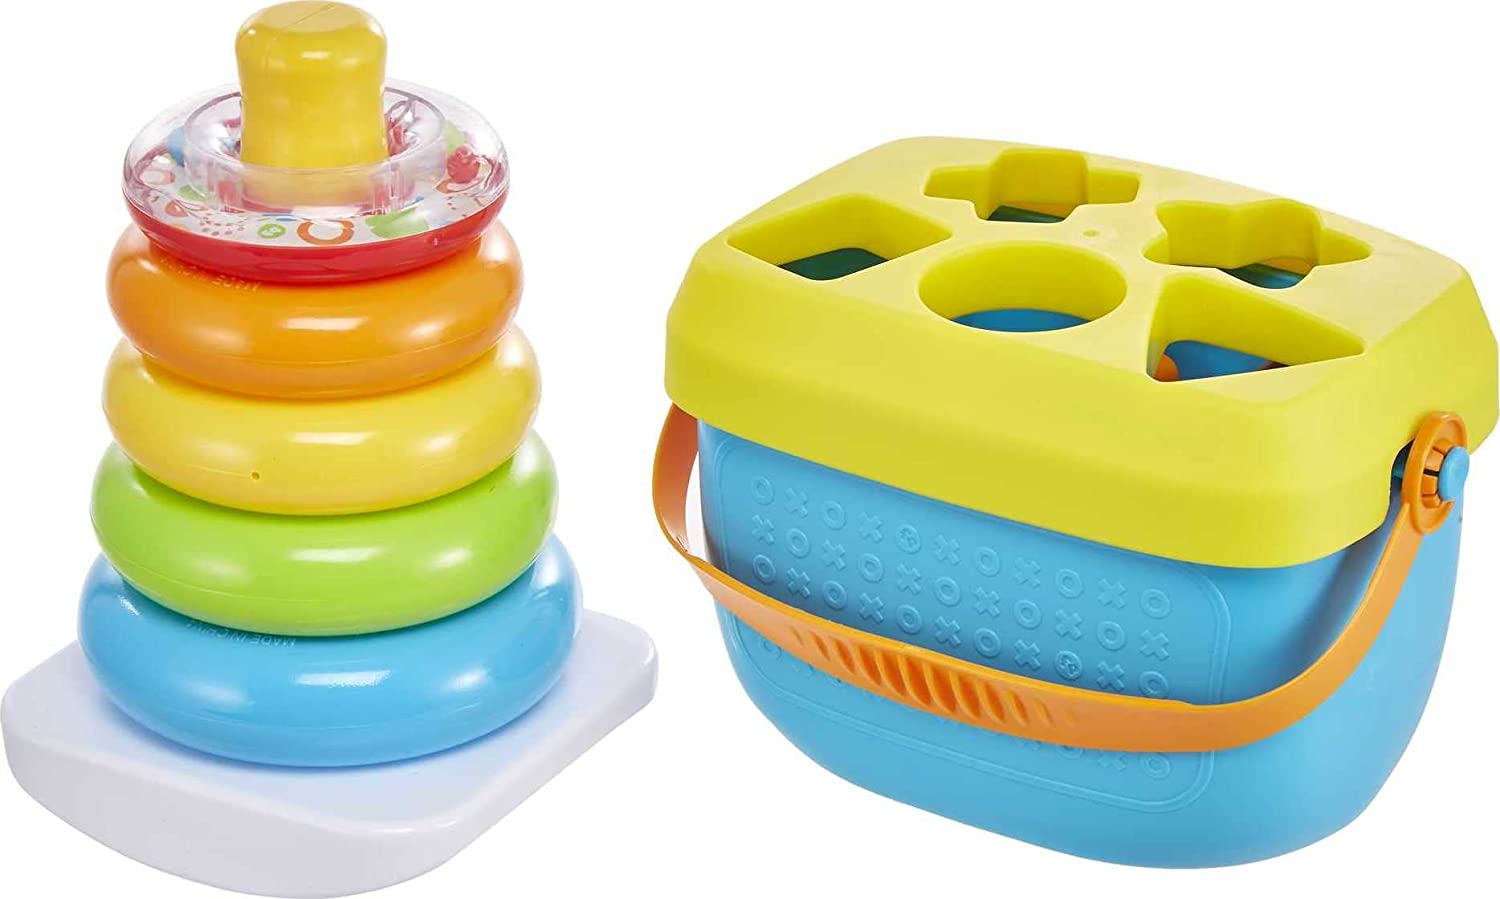 Fisher-Price Rock-a-Stack and Baby's First Blocks Bundle - with 10 Colorful Blocks & A Take-Along Storage Bucket